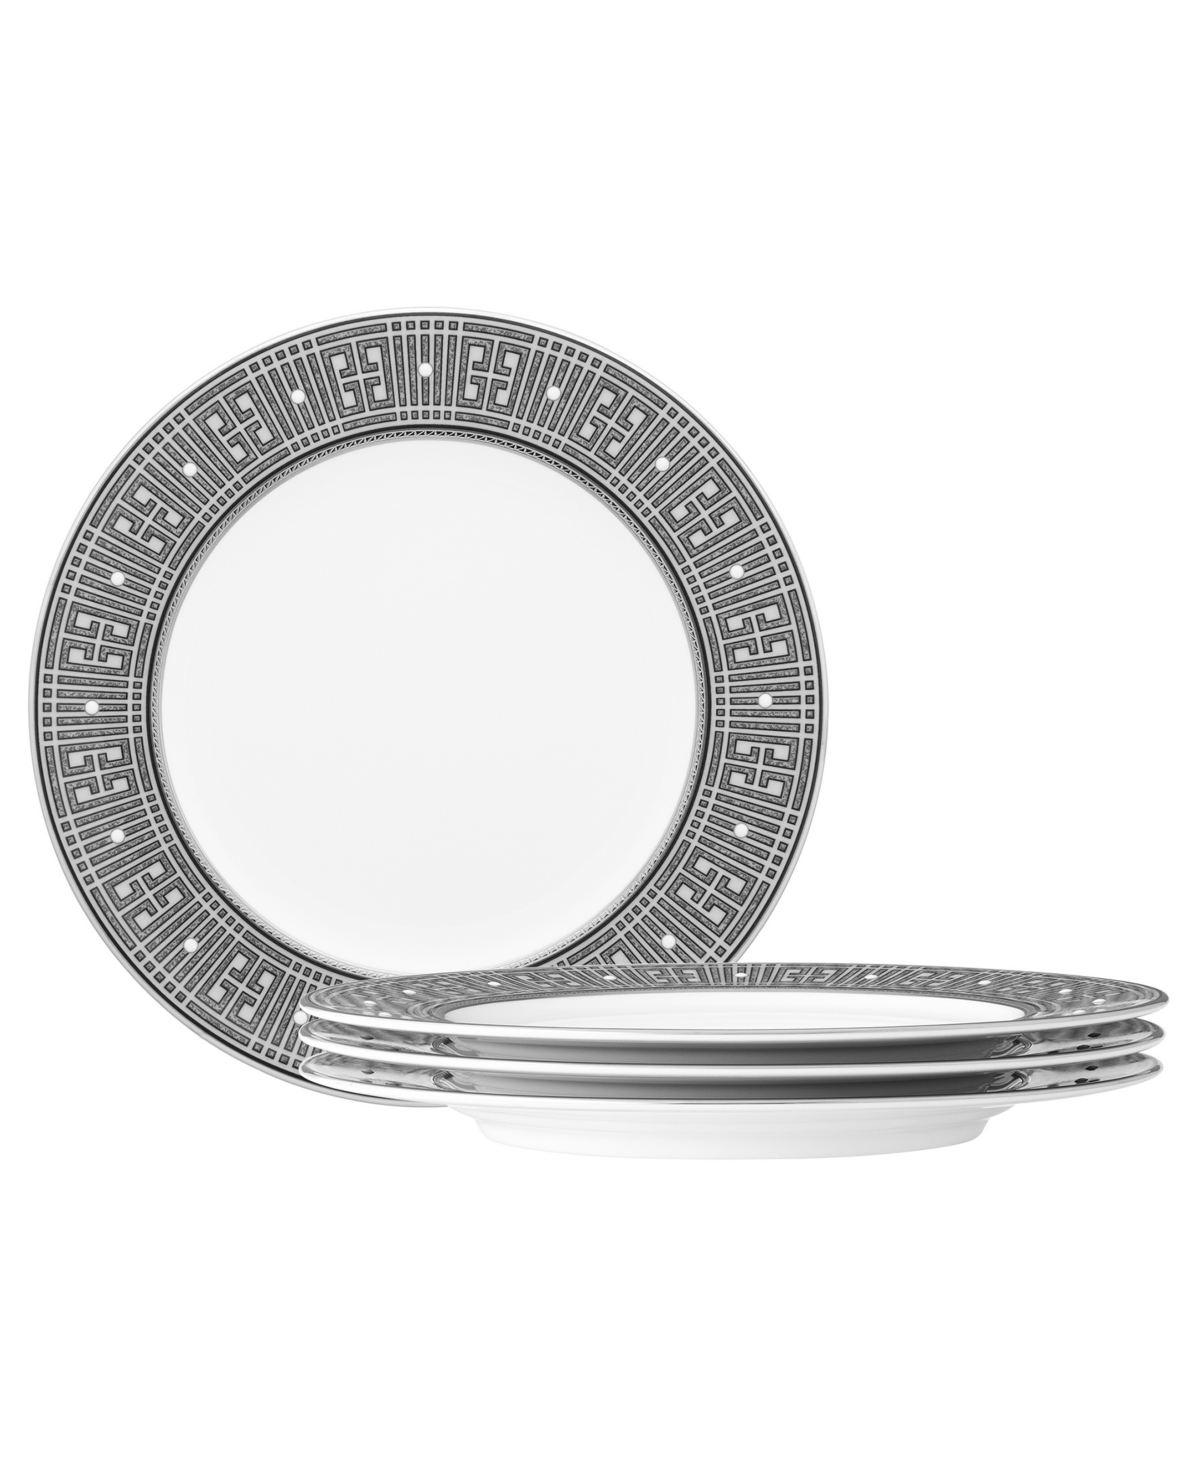 Noritake Infinity 4 Piece Salad Plate Set, Service For 4 In Graphite